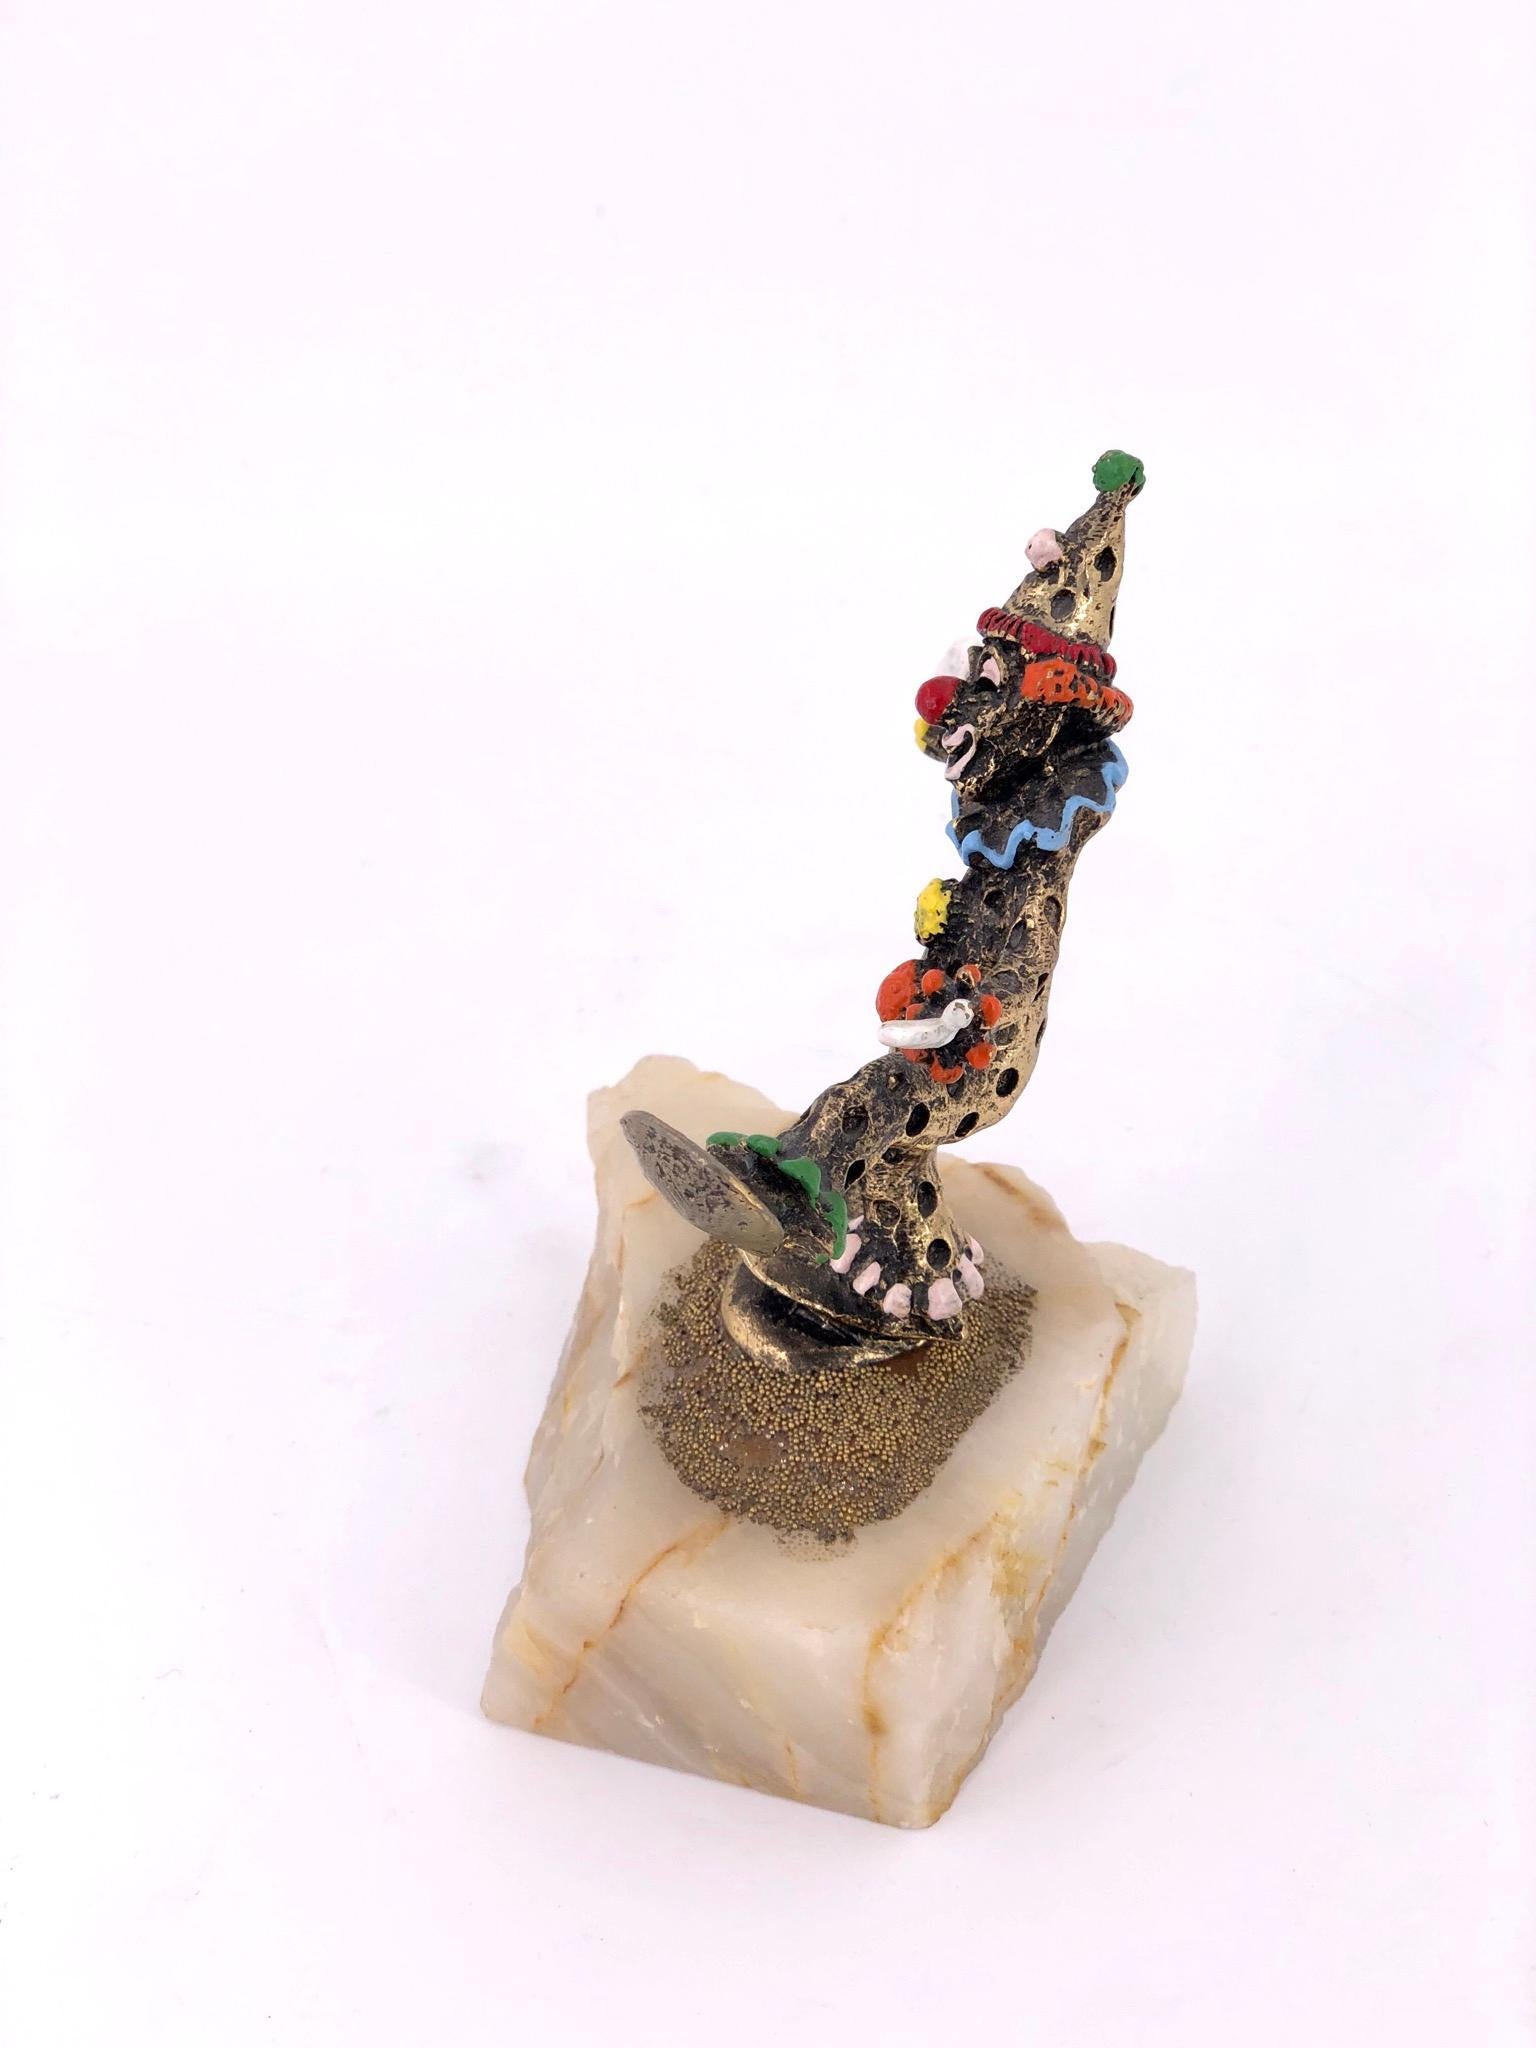 American Whimsical Bronze Sculpture with Enamel Highlights Signed by Ron Lee